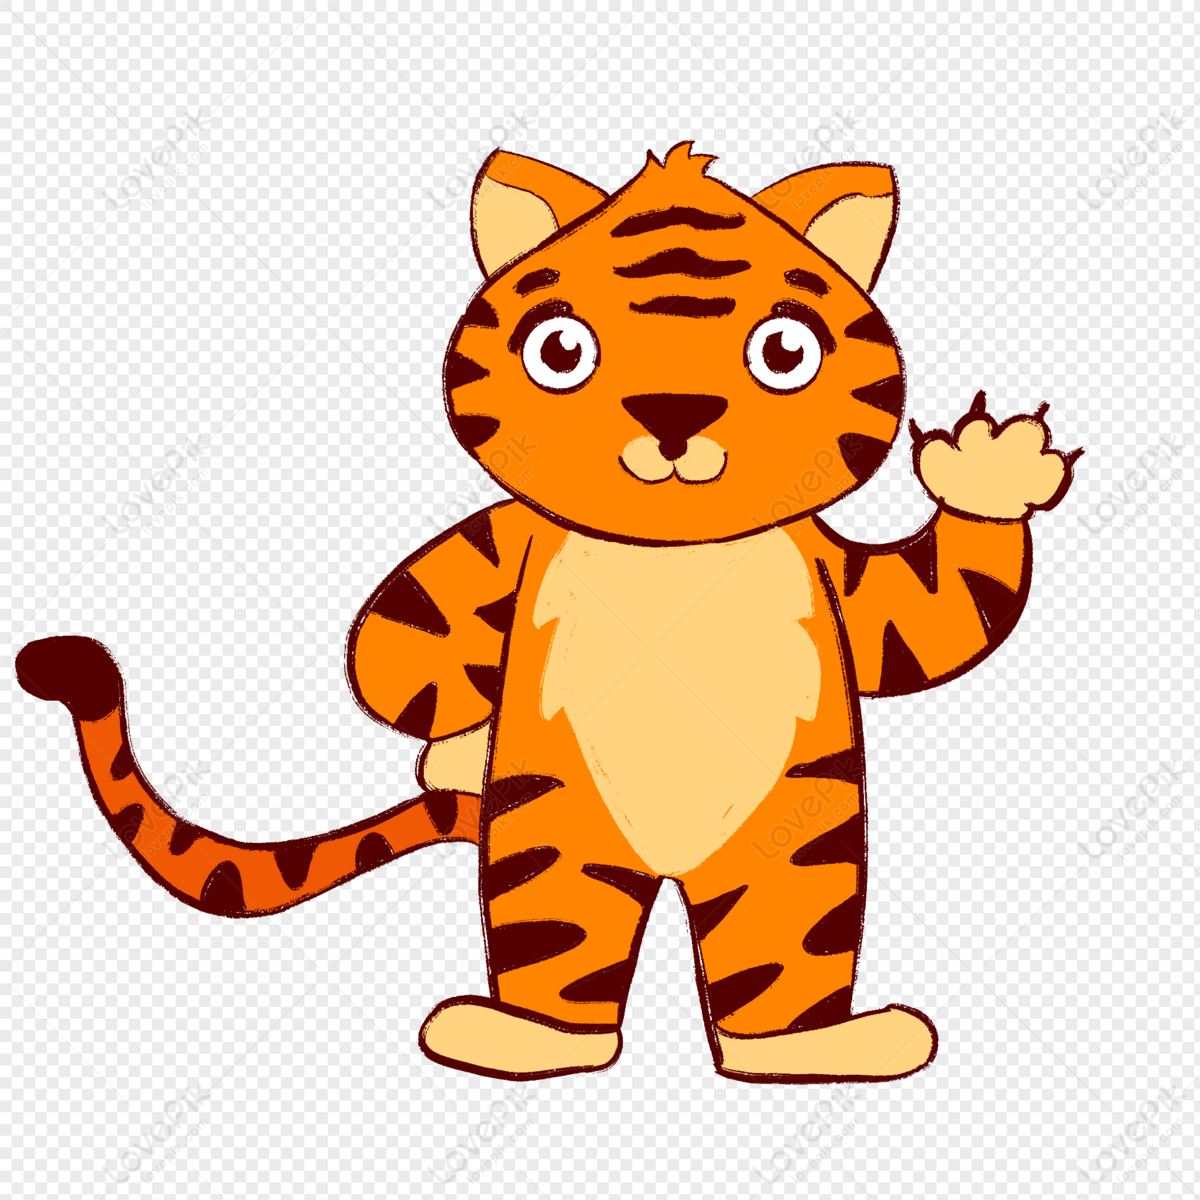 Cartoon Tiger PNG Transparent Image And Clipart Image For Free Download -  Lovepik | 402017597